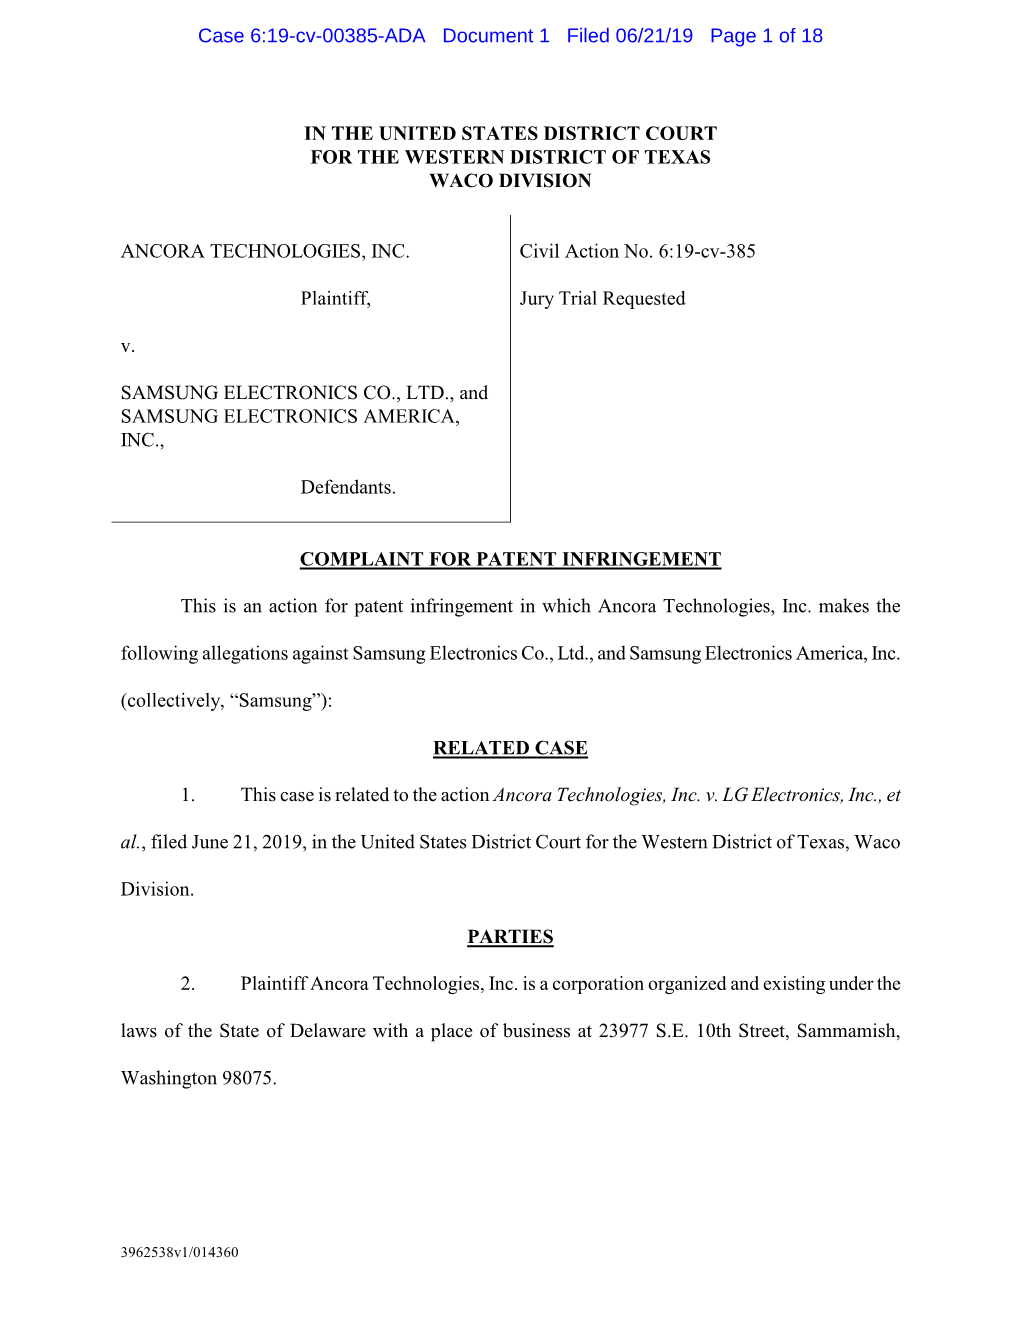 Case 6:19-Cv-00385-ADA Document 1 Filed 06/21/19 Page 1 of 18